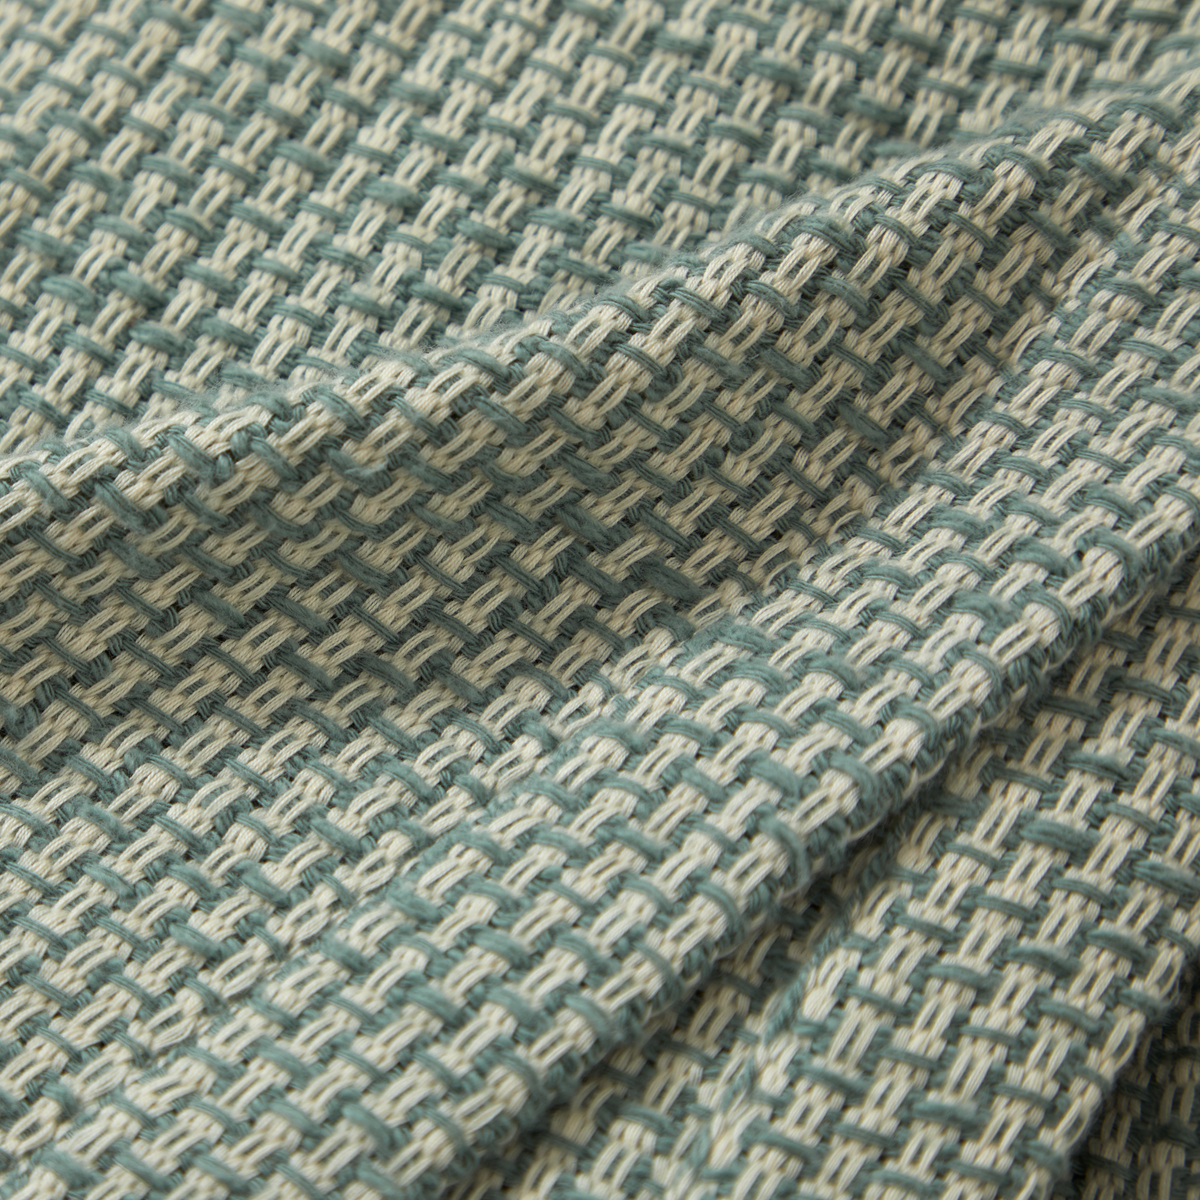 Swatch Sample of Yves Delorme Transat Throw in Color Celadon